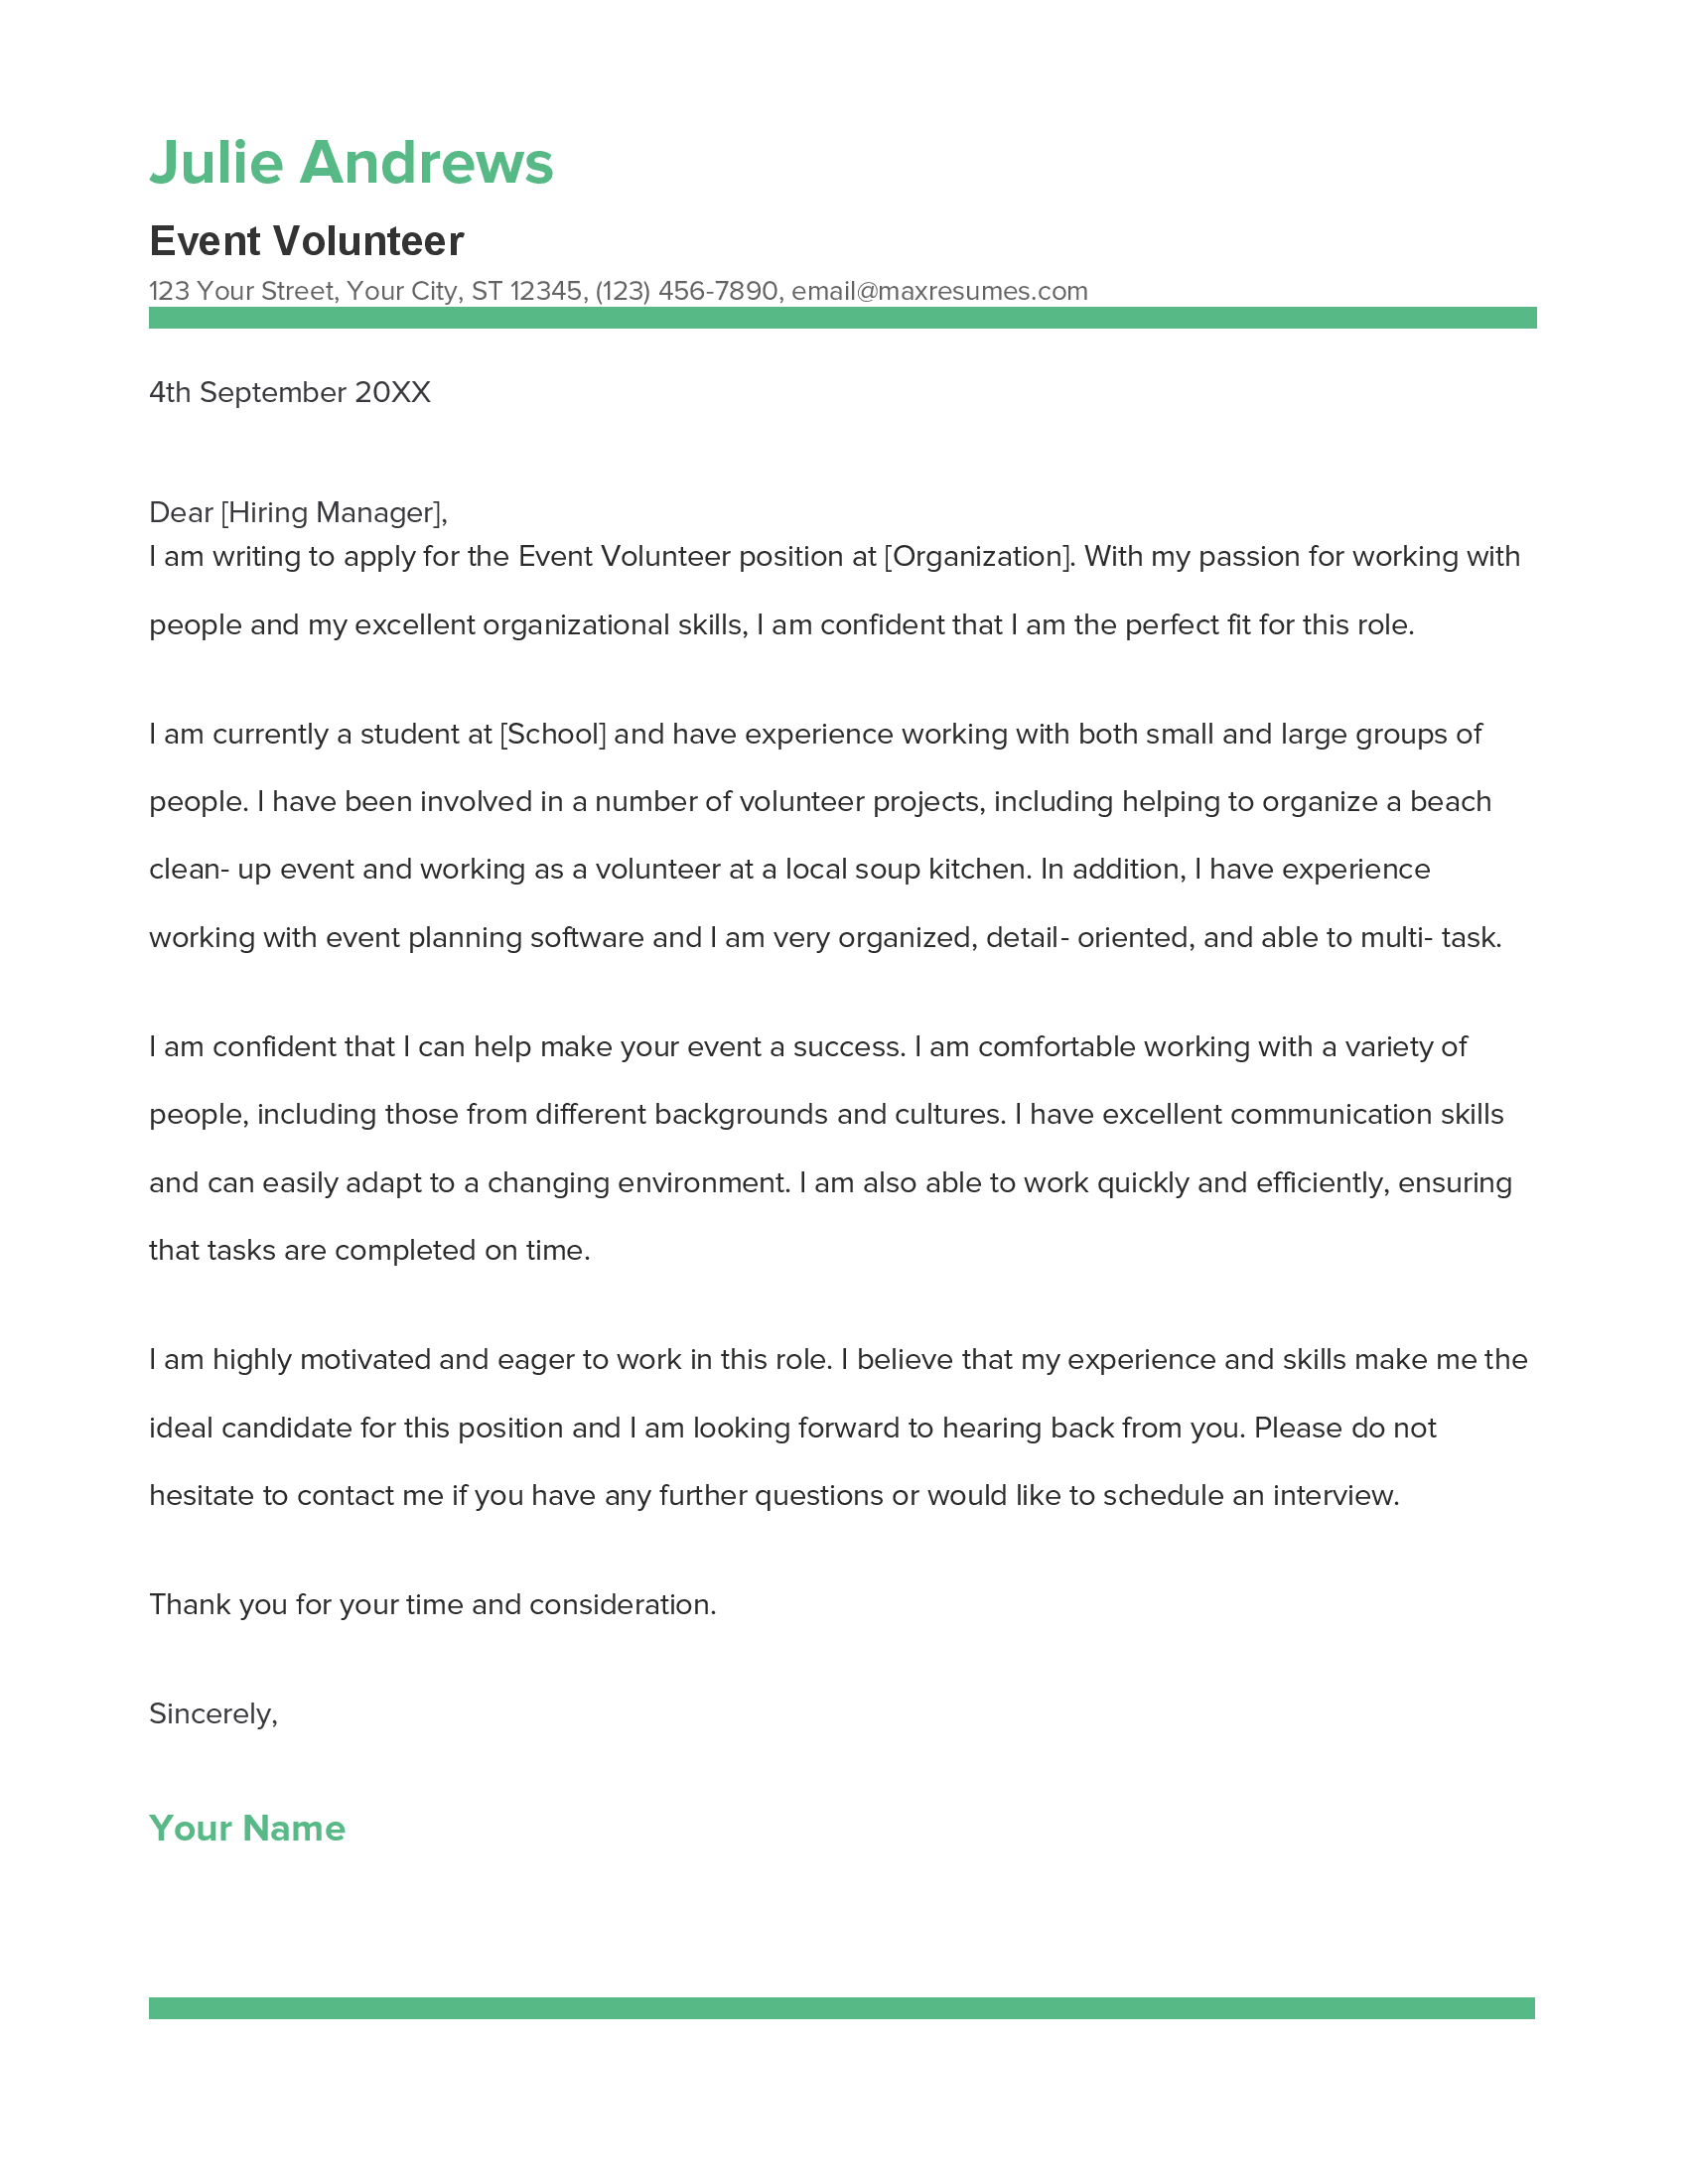 Event Volunteer Cover Letter Example